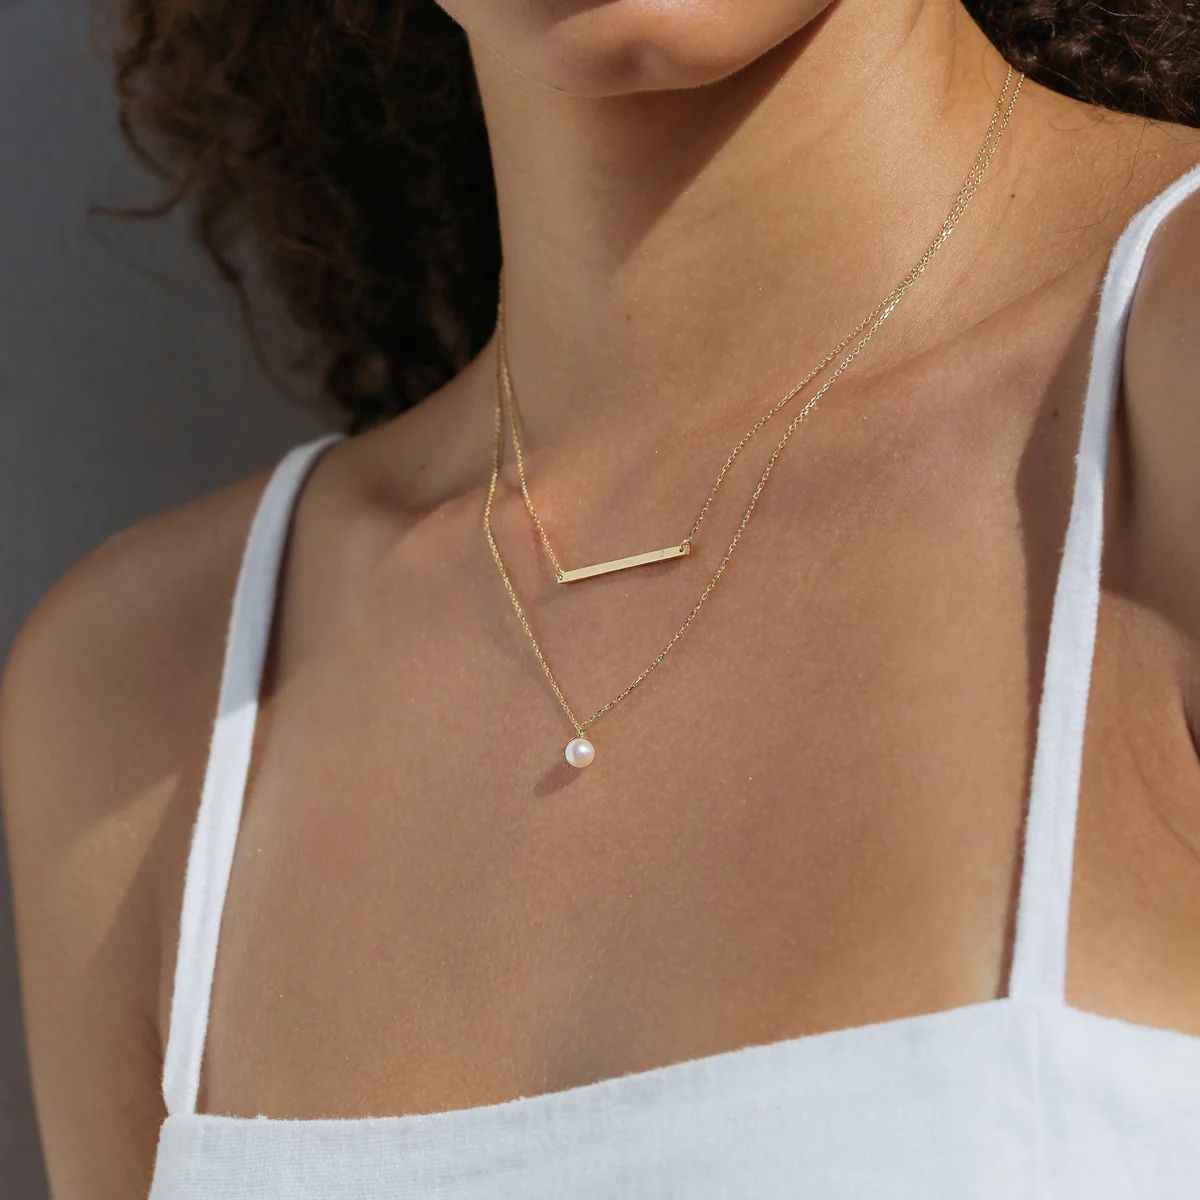 Simple Pearl Necklace | AUrate New York